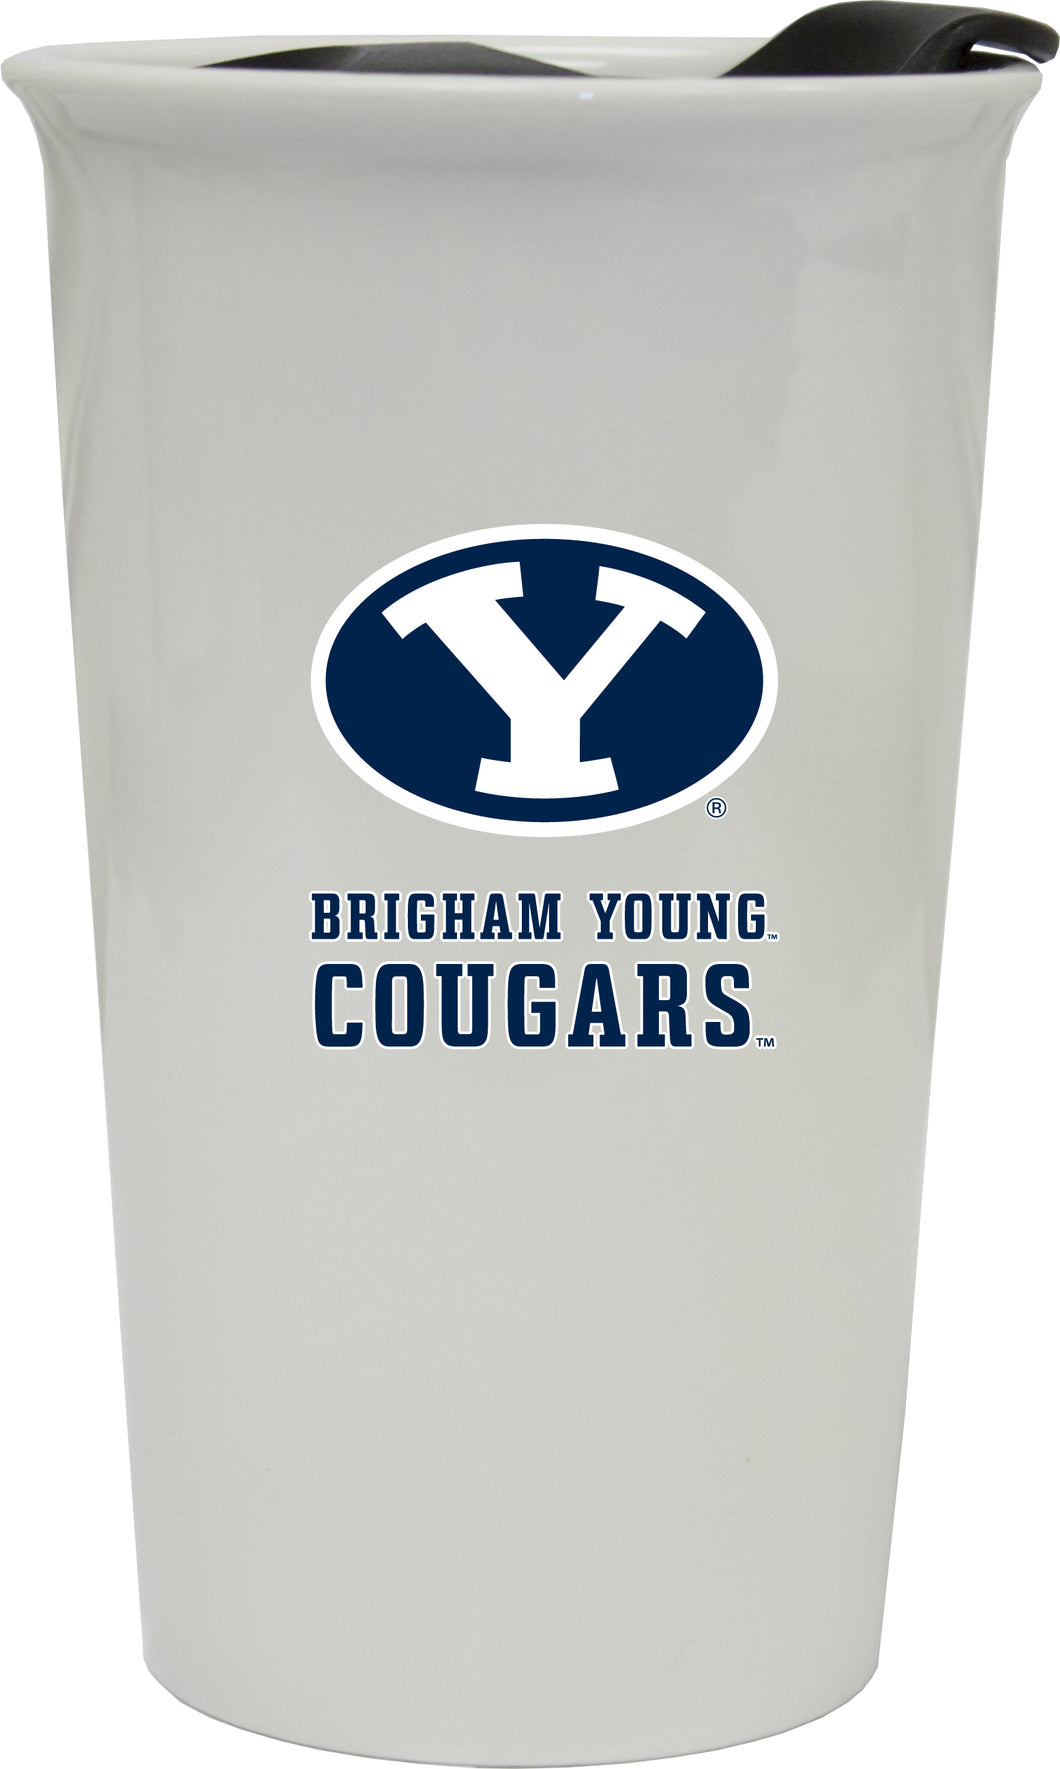 Brigham Young Cougars Double Walled Ceramic Tumbler